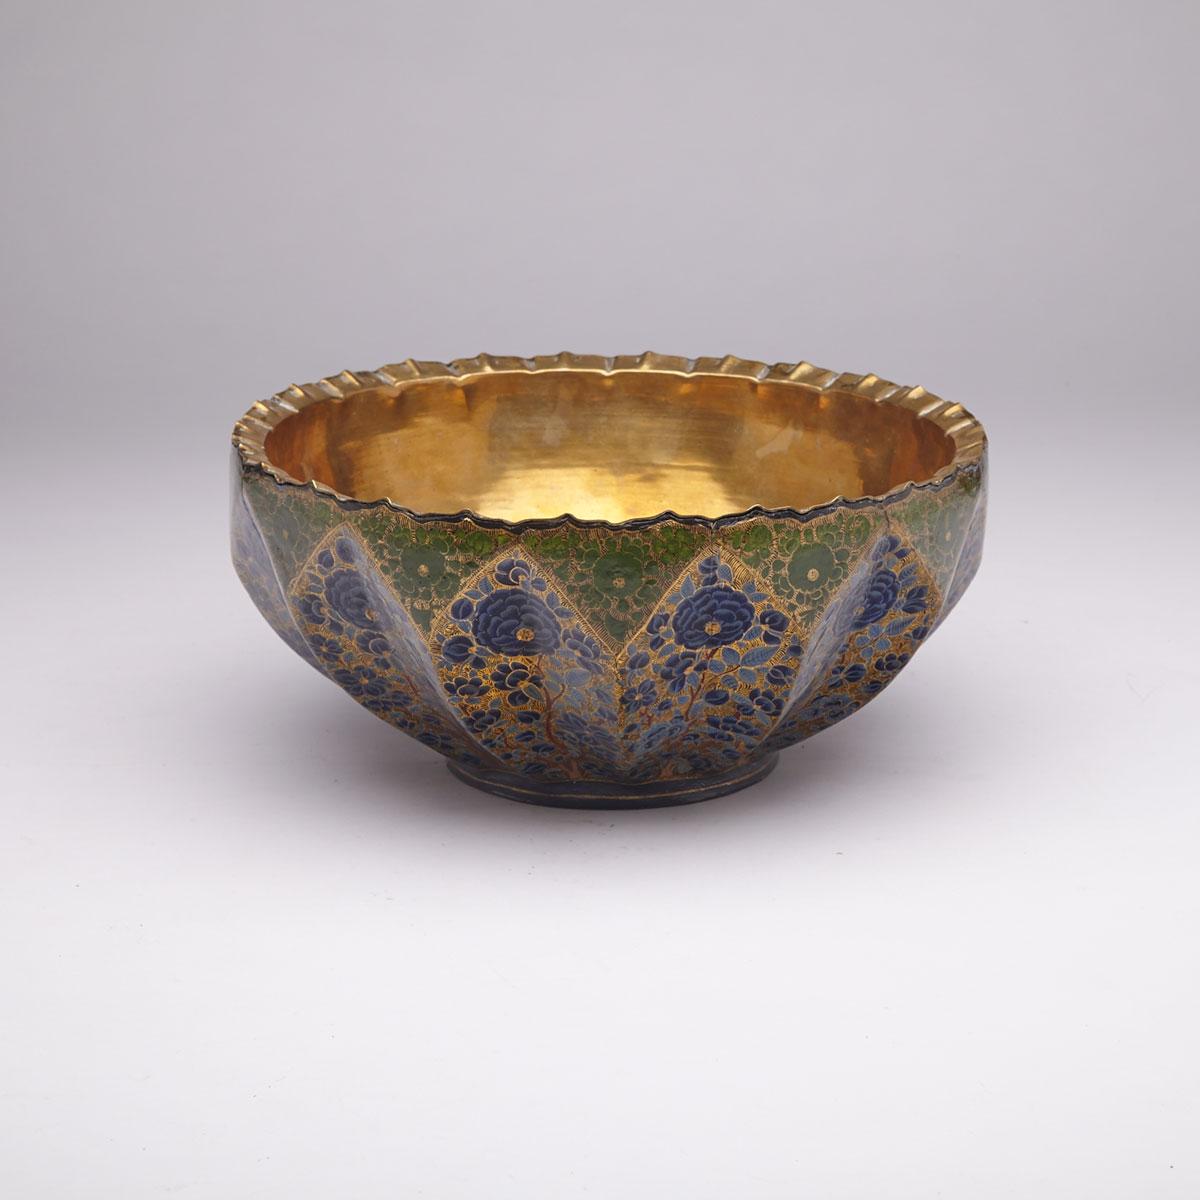 Qajar Lacquered Brass Bowl, Persia, 19th Century